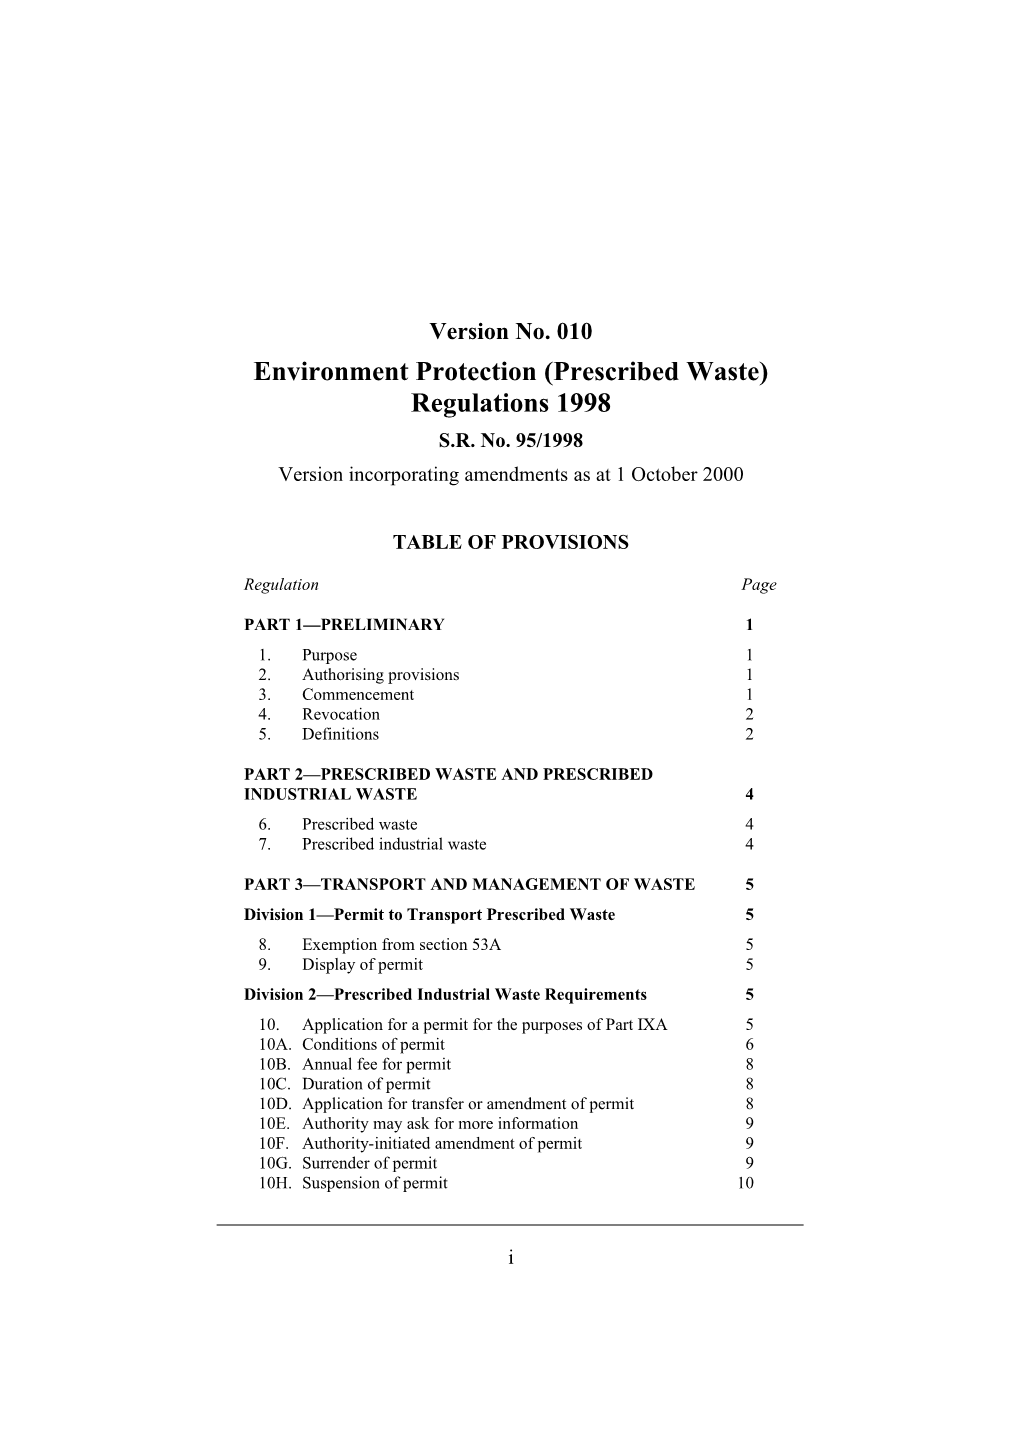 Environment Protection (Prescribed Waste) Regulations 1998